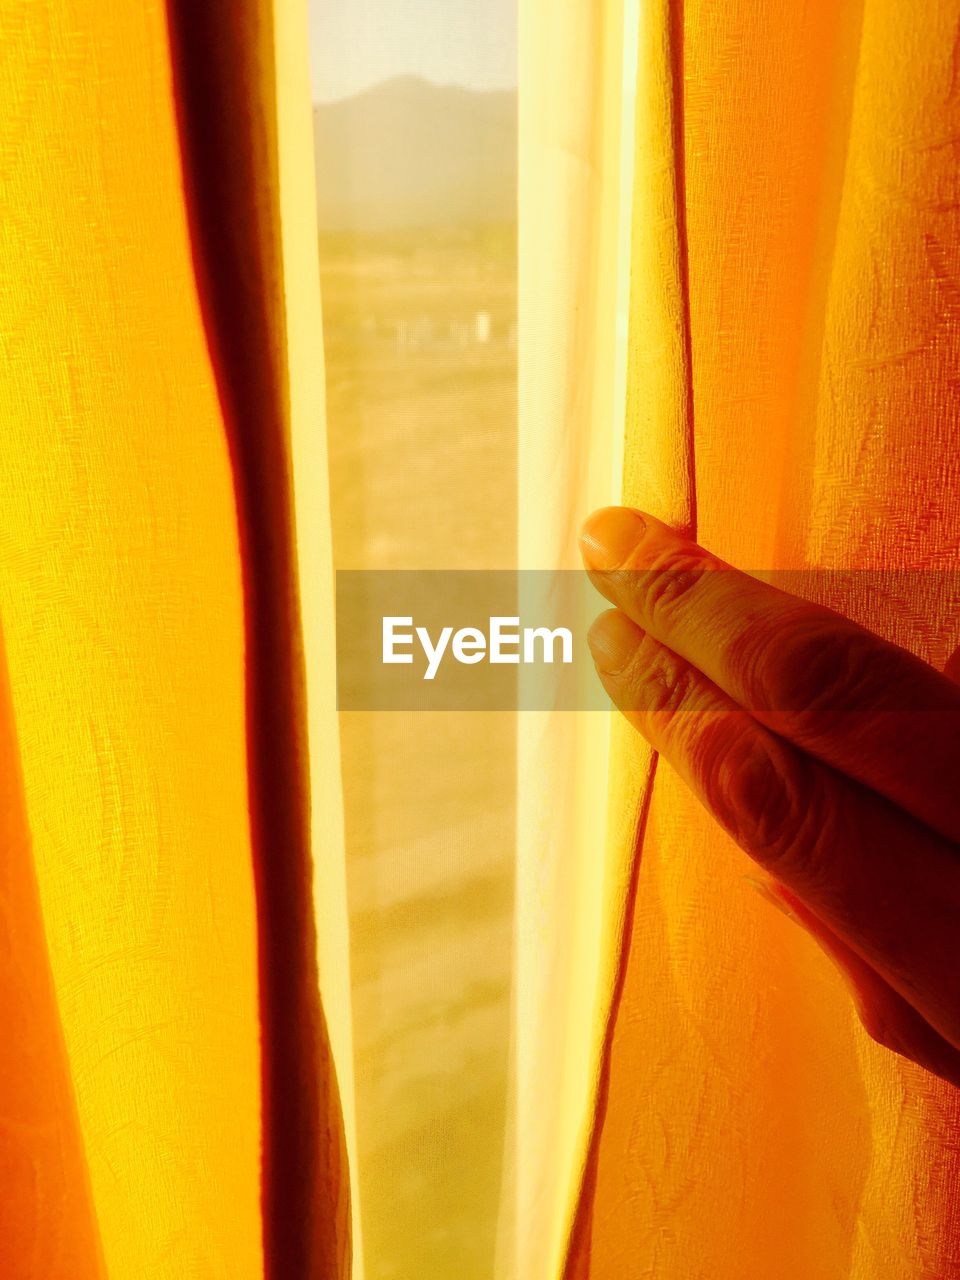 CLOSE-UP OF PERSON HAND AGAINST WINDOW